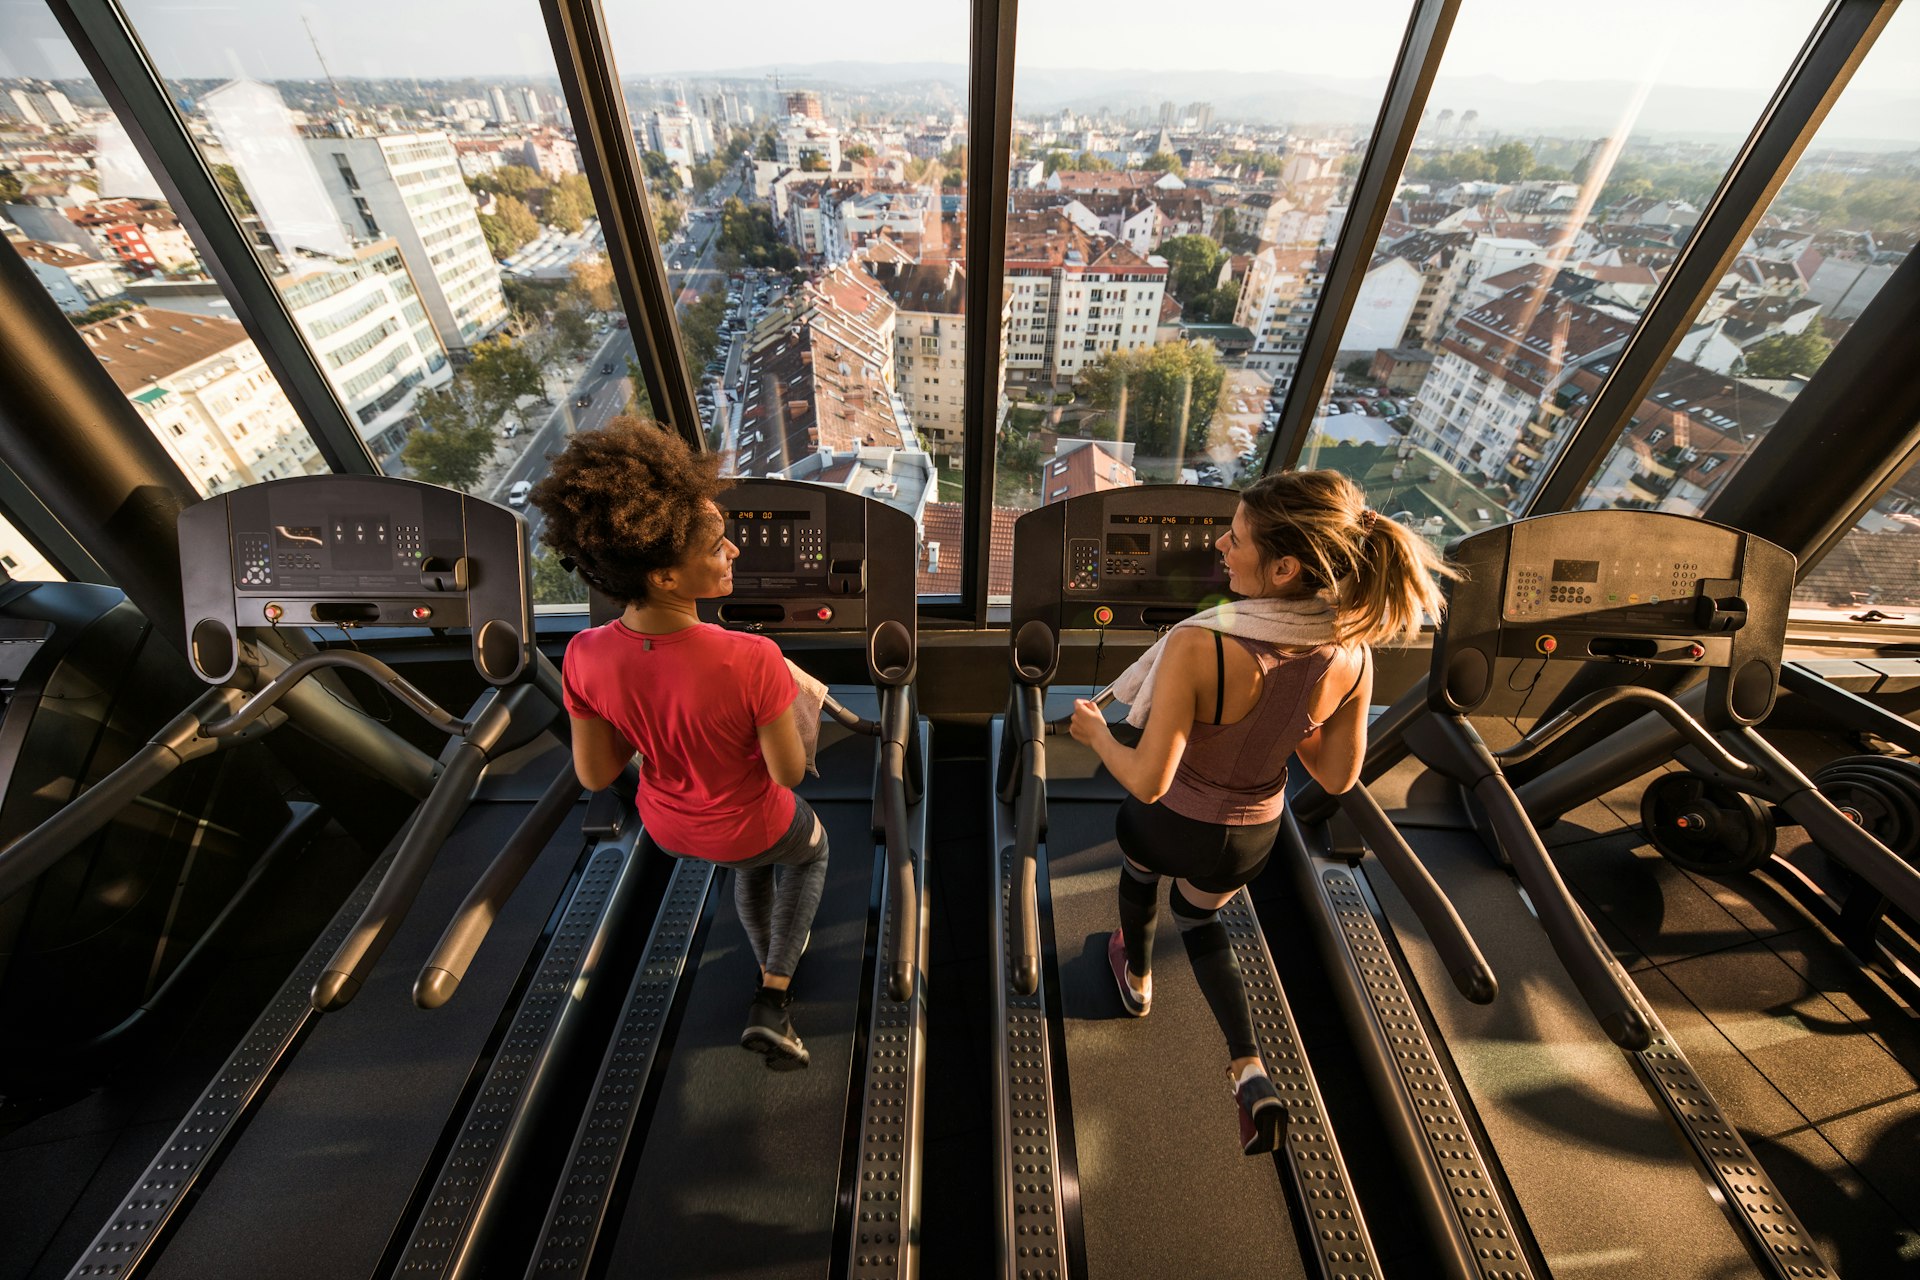 Two women run on treadmills in front a window showing a view of a city. 